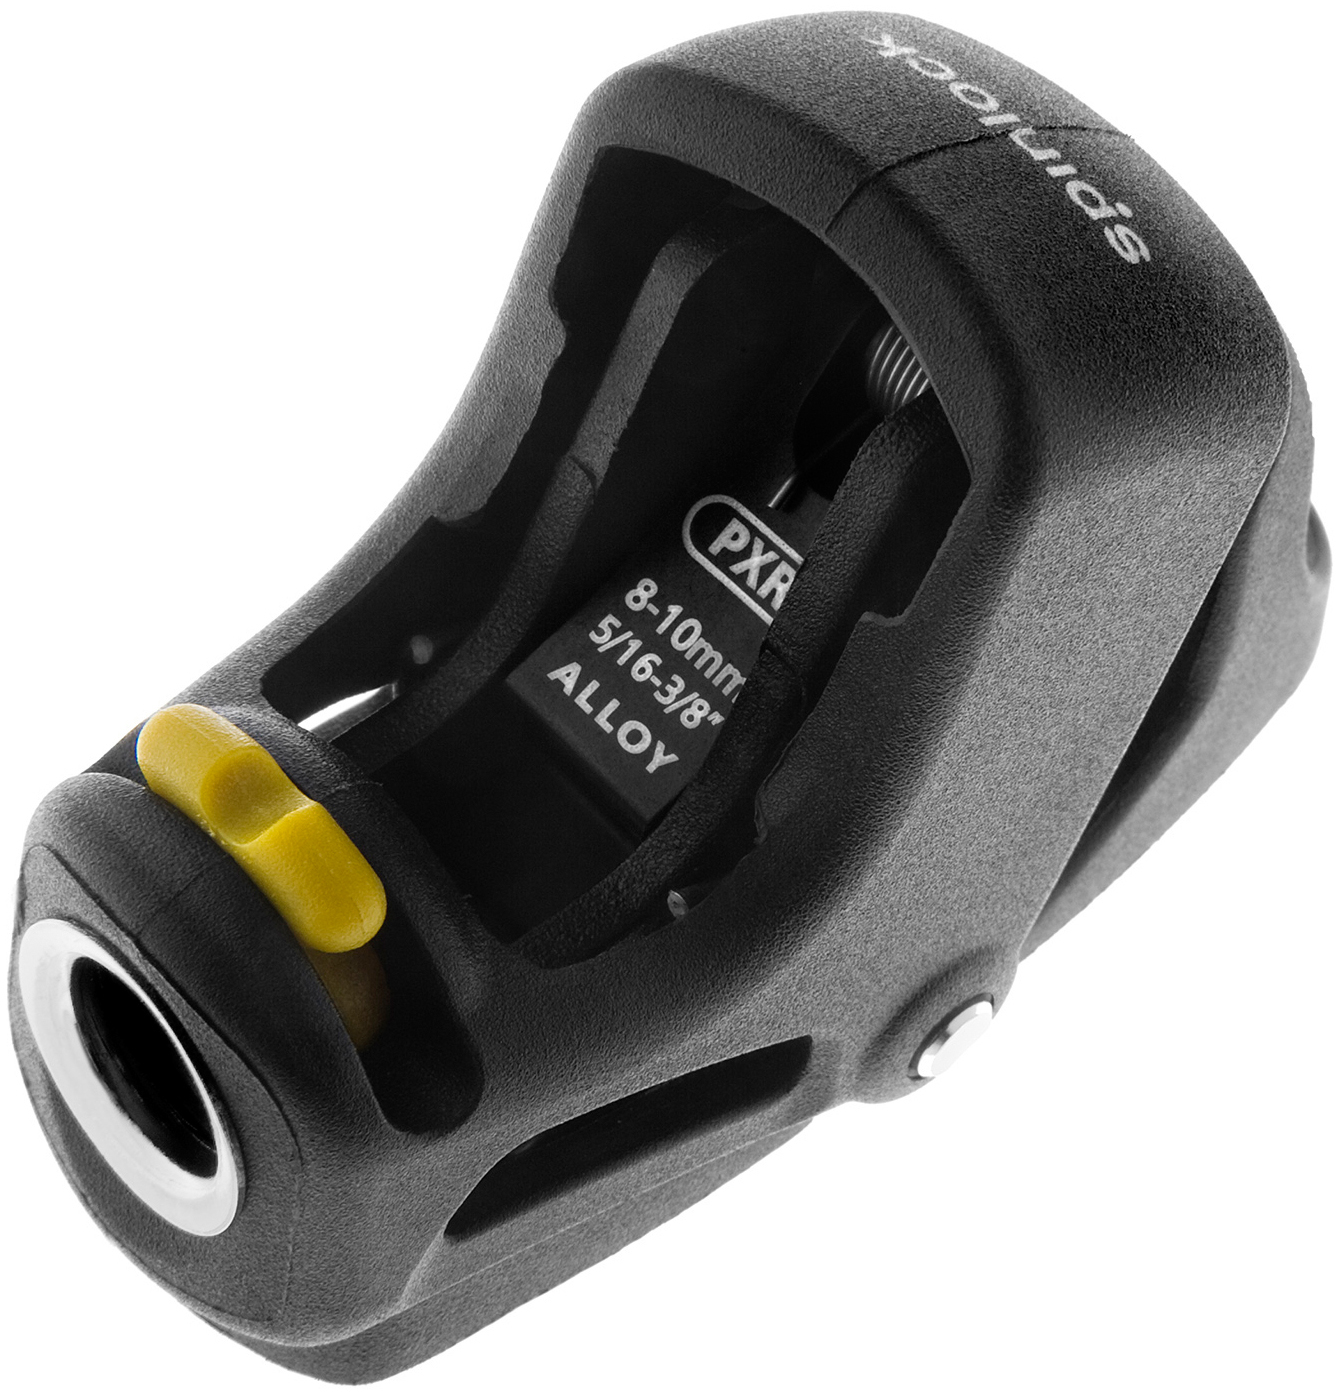 Spinlock PXR Cam Cleat for 8-10 mm tau